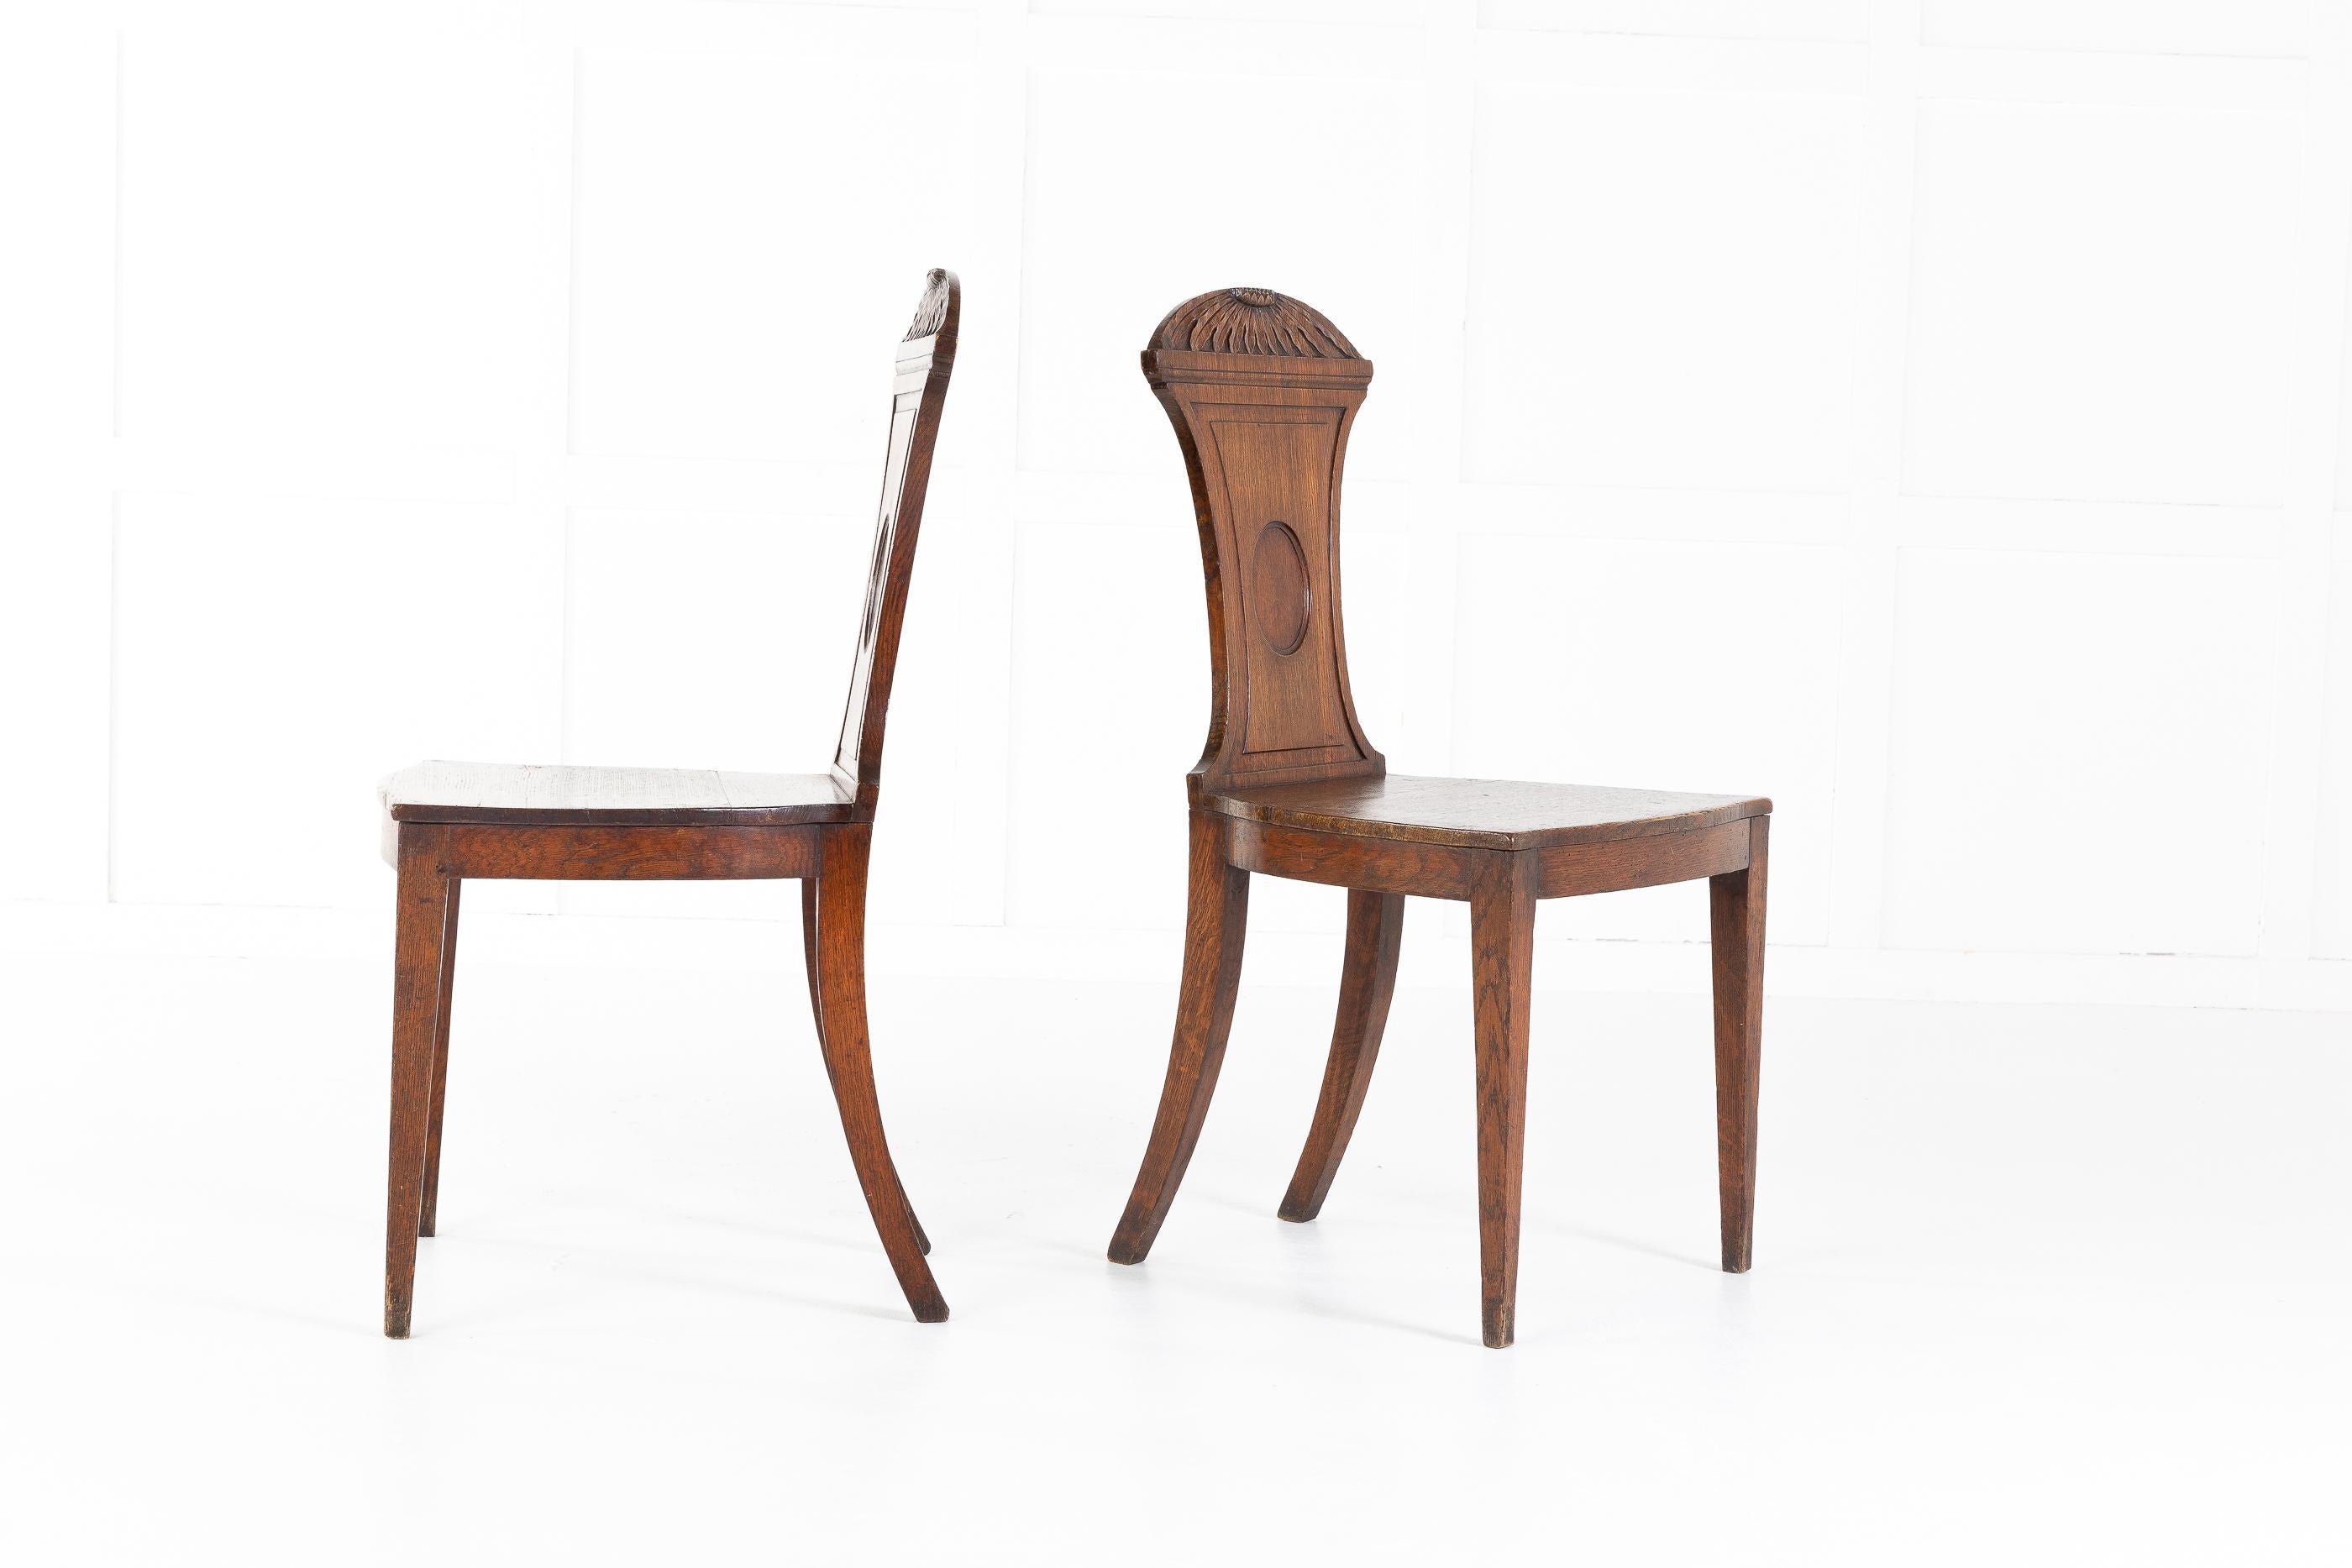 Pair of 19th century Regency oak hall chairs with carved backs. Solid seats upon elegant, tapered legs with outswept back legs.
Measures: Seat height 43cm
Seat depth 39.5cm.